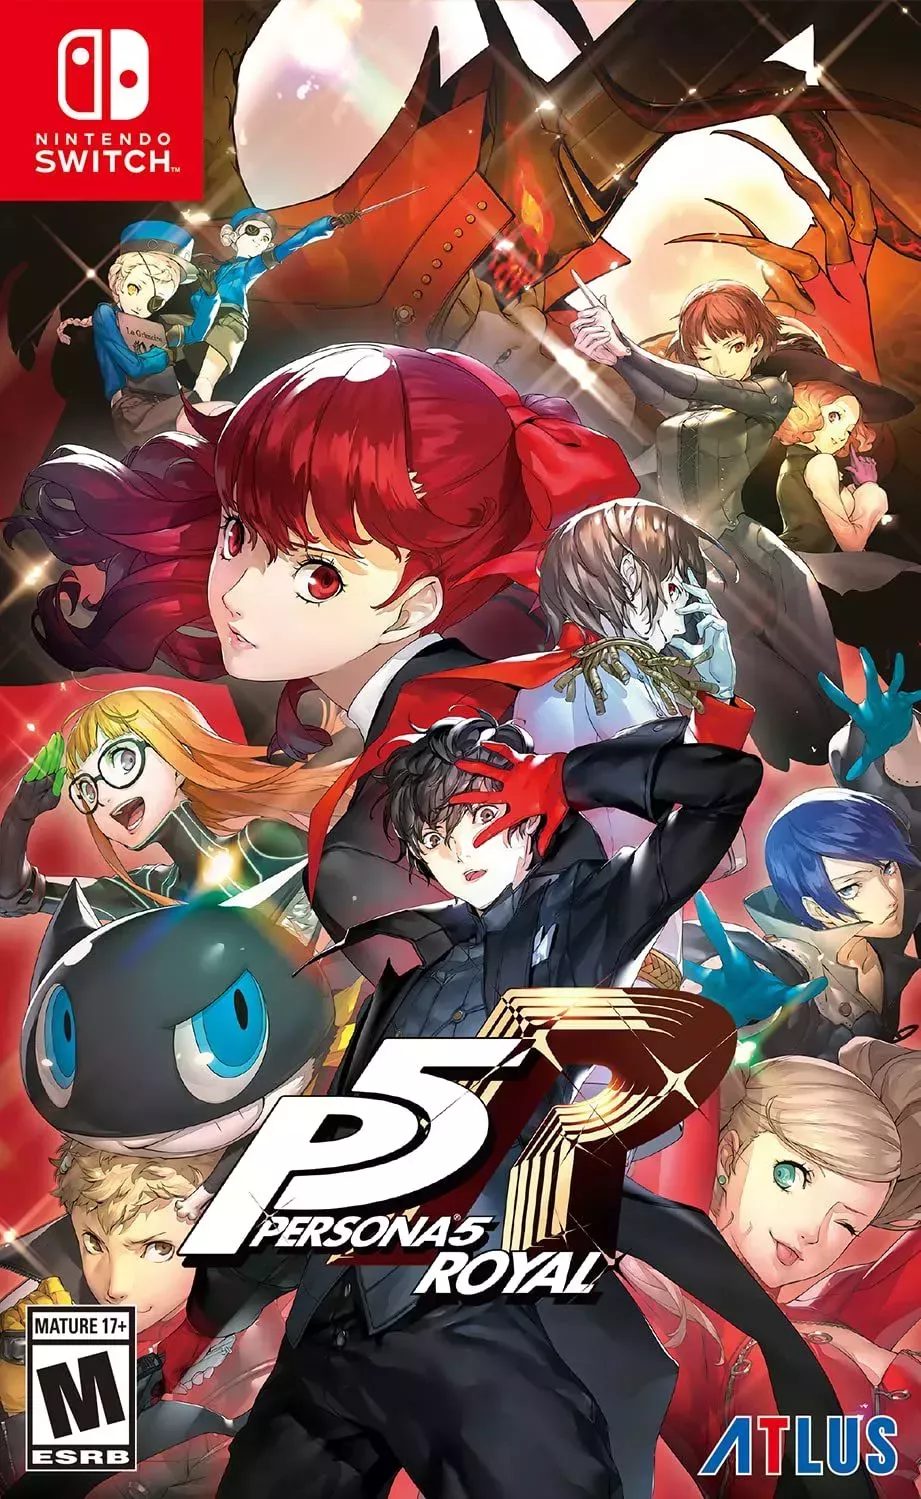 A collage of characters on the cover art for Persona 5 Royal